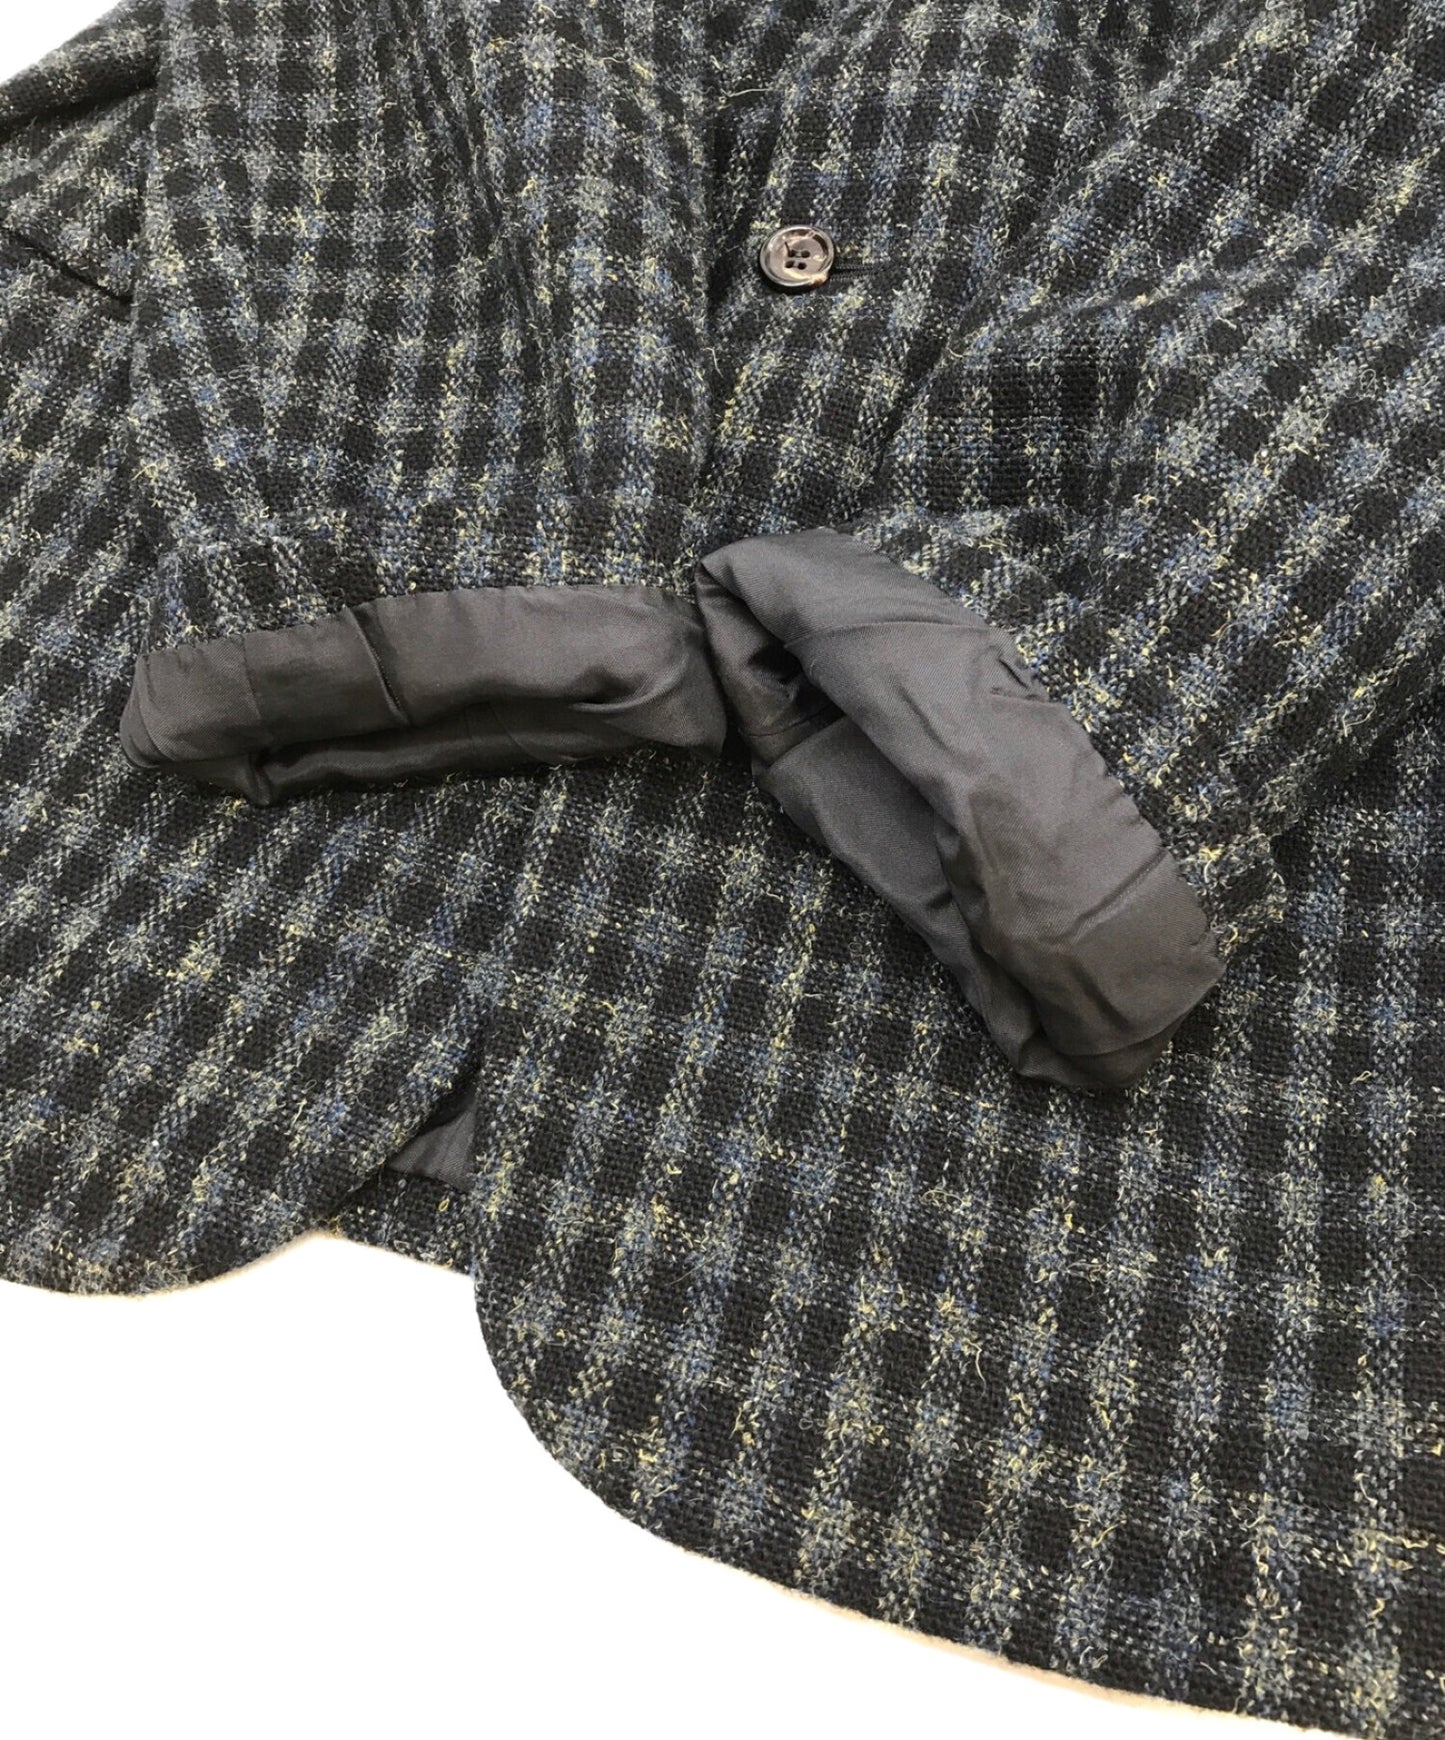 [Pre-owned] COMME des GARCONS HOMME [OLD] 90's Tweed Check Tailored Jacket HJ-08015S